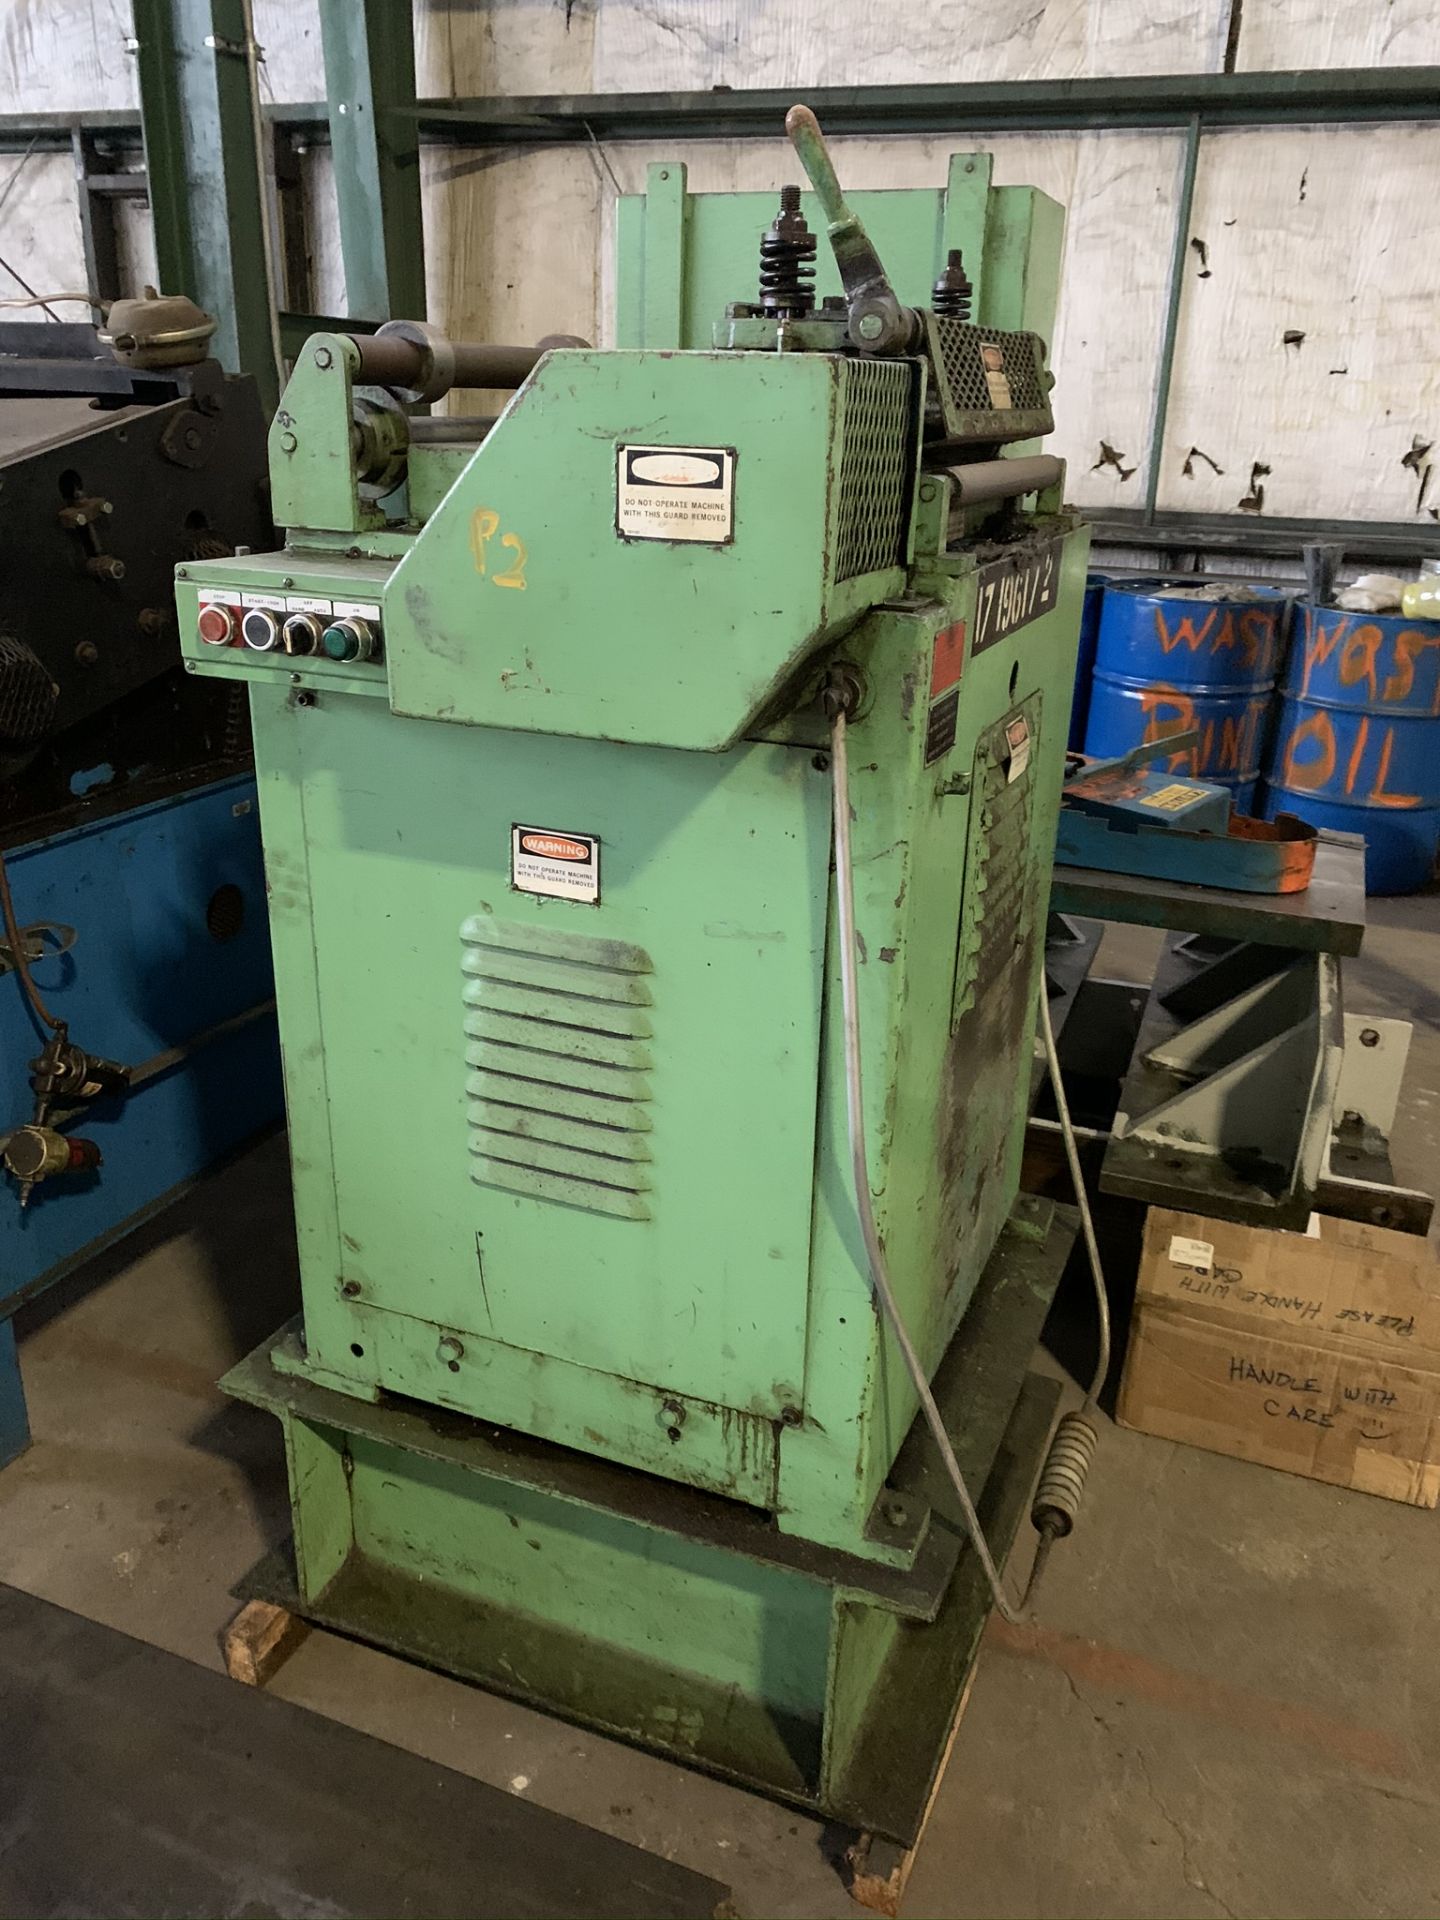 18" LITTELL MODEL 318 CONTINUOUS STRAIGHTENING FEEDER; S/N 85469-2, CAPACITY 18" WIDTH, MATERIAL